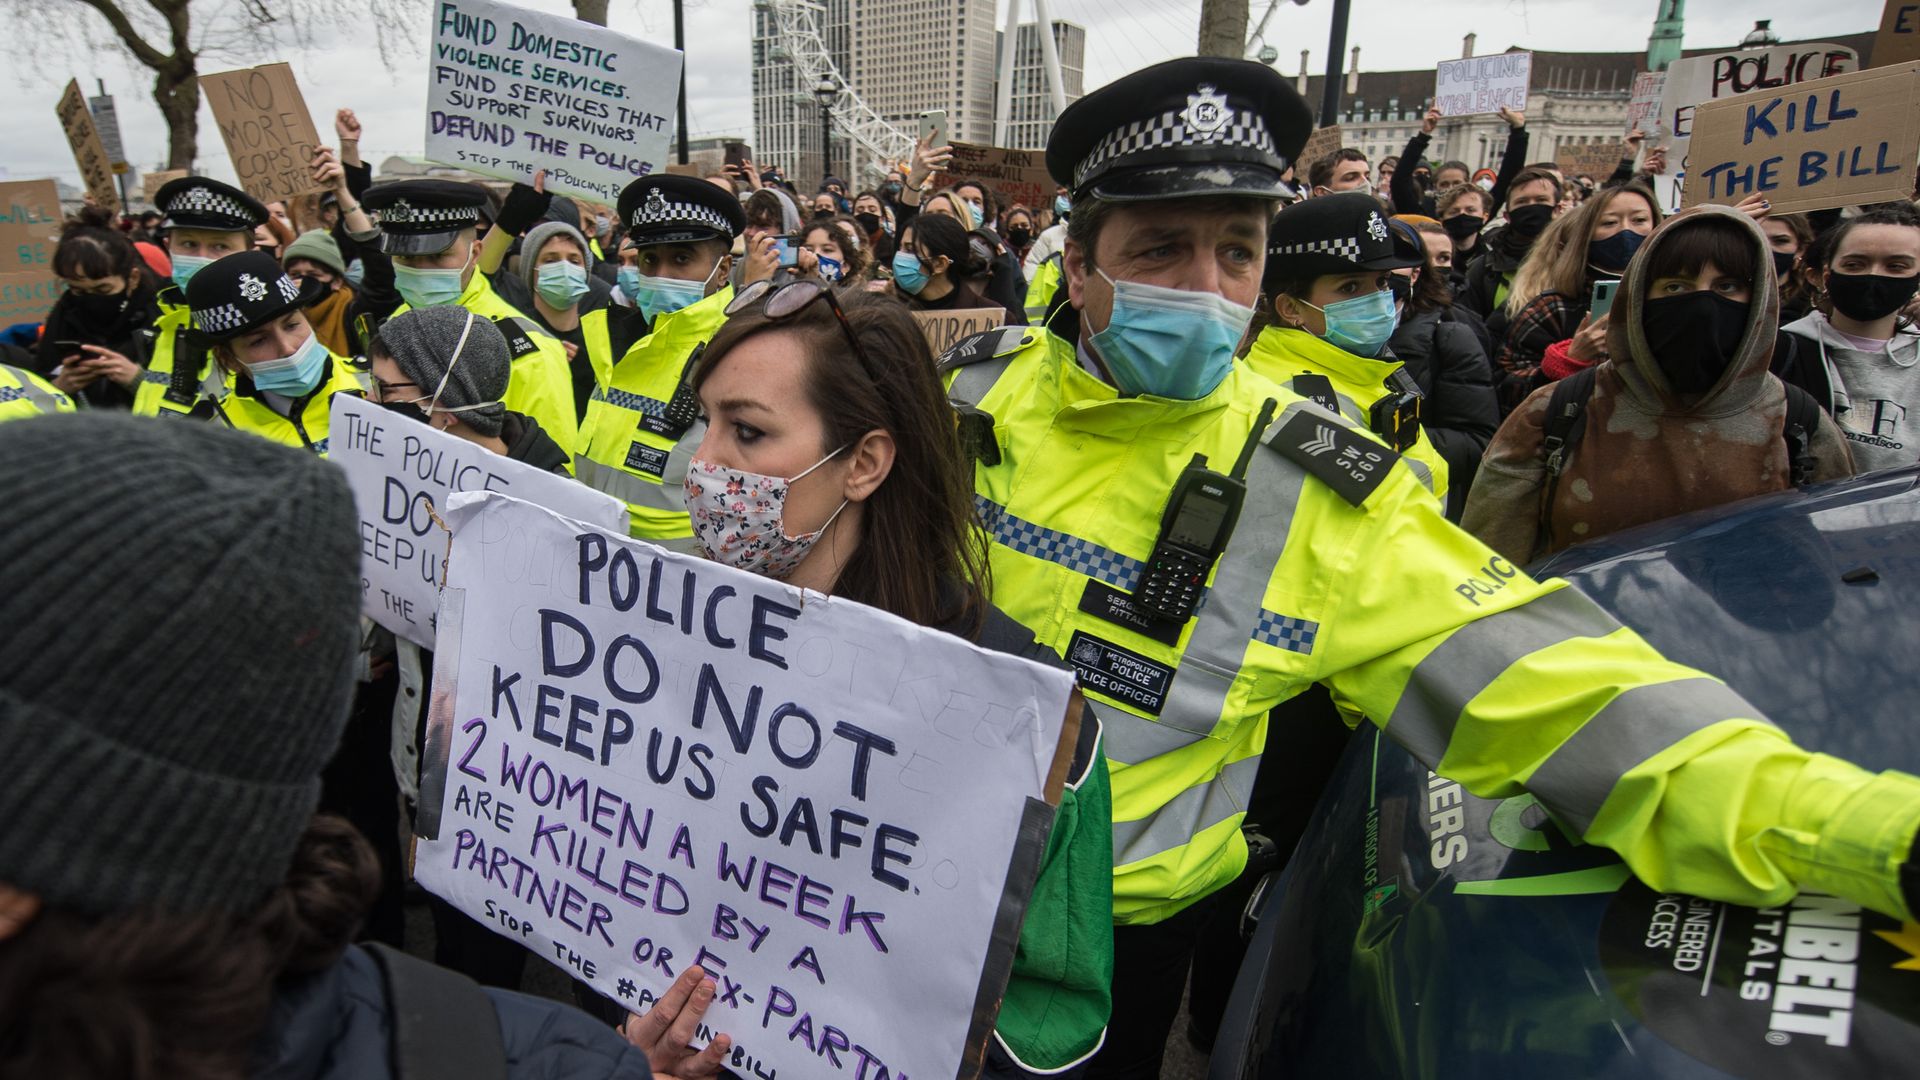 Protestors demonstrate outside Scotland Yard over the treatment of people by police at a March vigil for Sarah Everard  in London, England. 